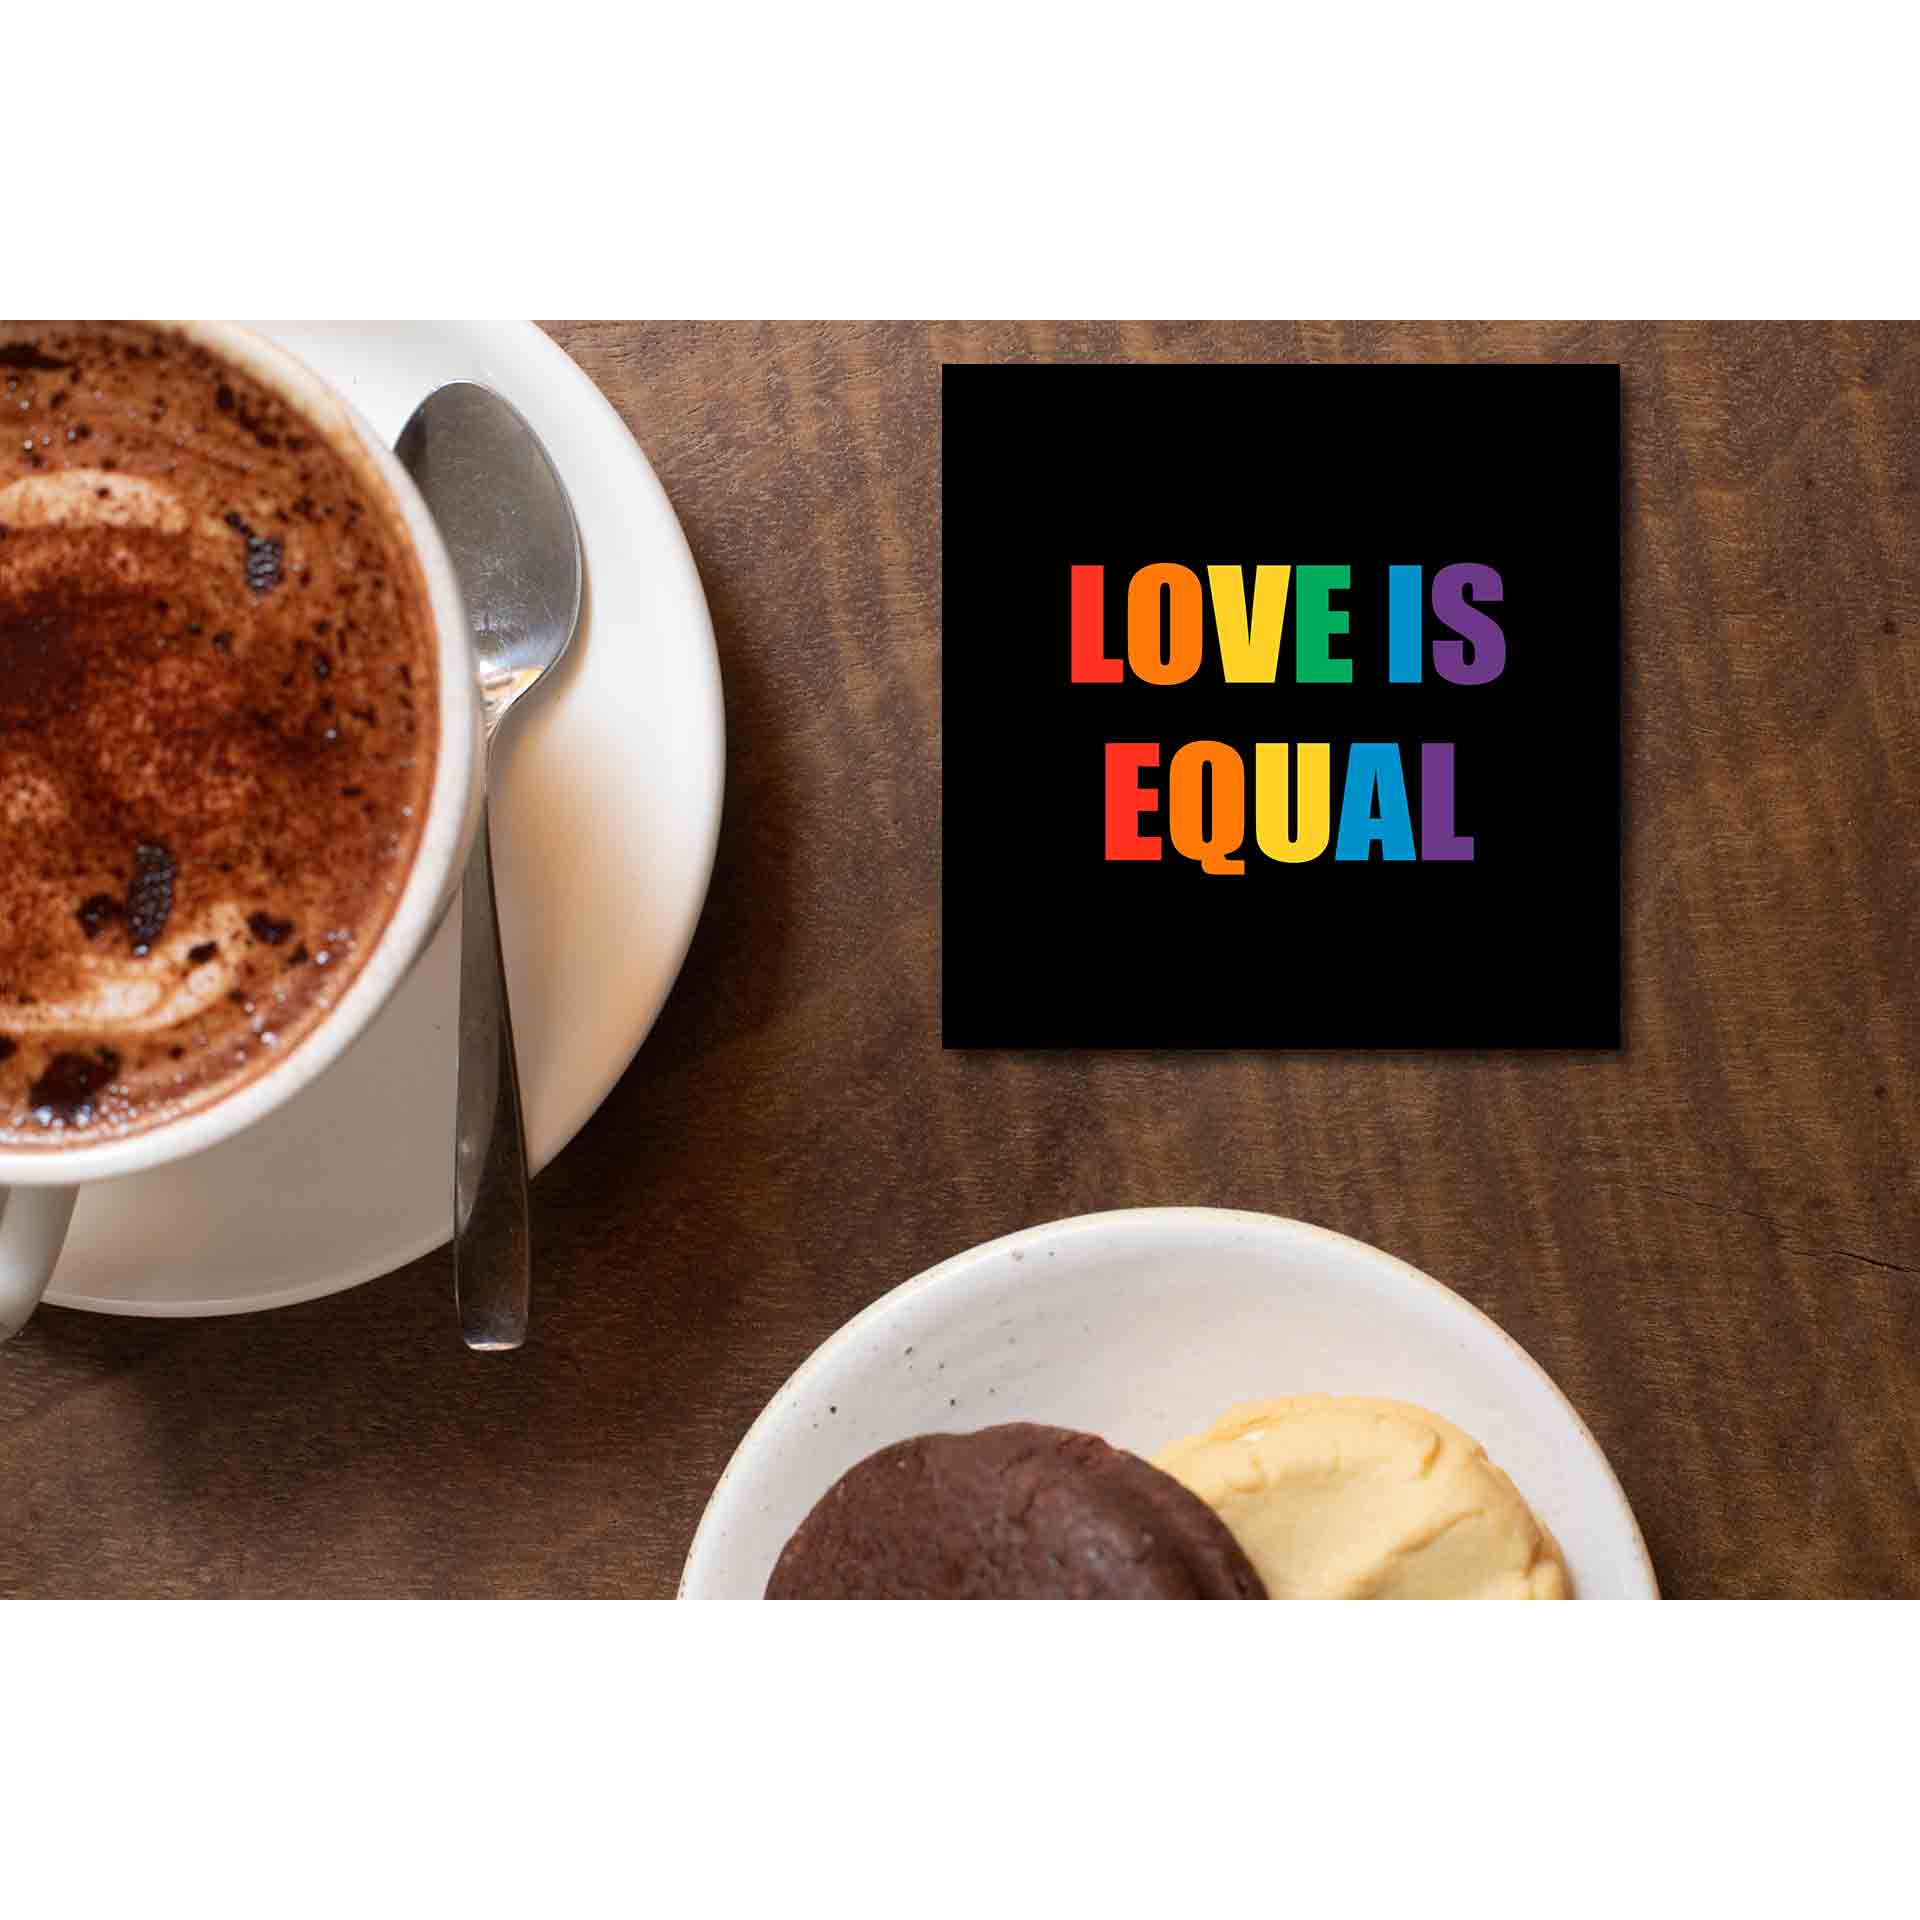 pride love is equal coasters wooden table cups indian printed graphic stylish buy online india the banyan tee tbt men women girls boys unisex  - lgbtqia+